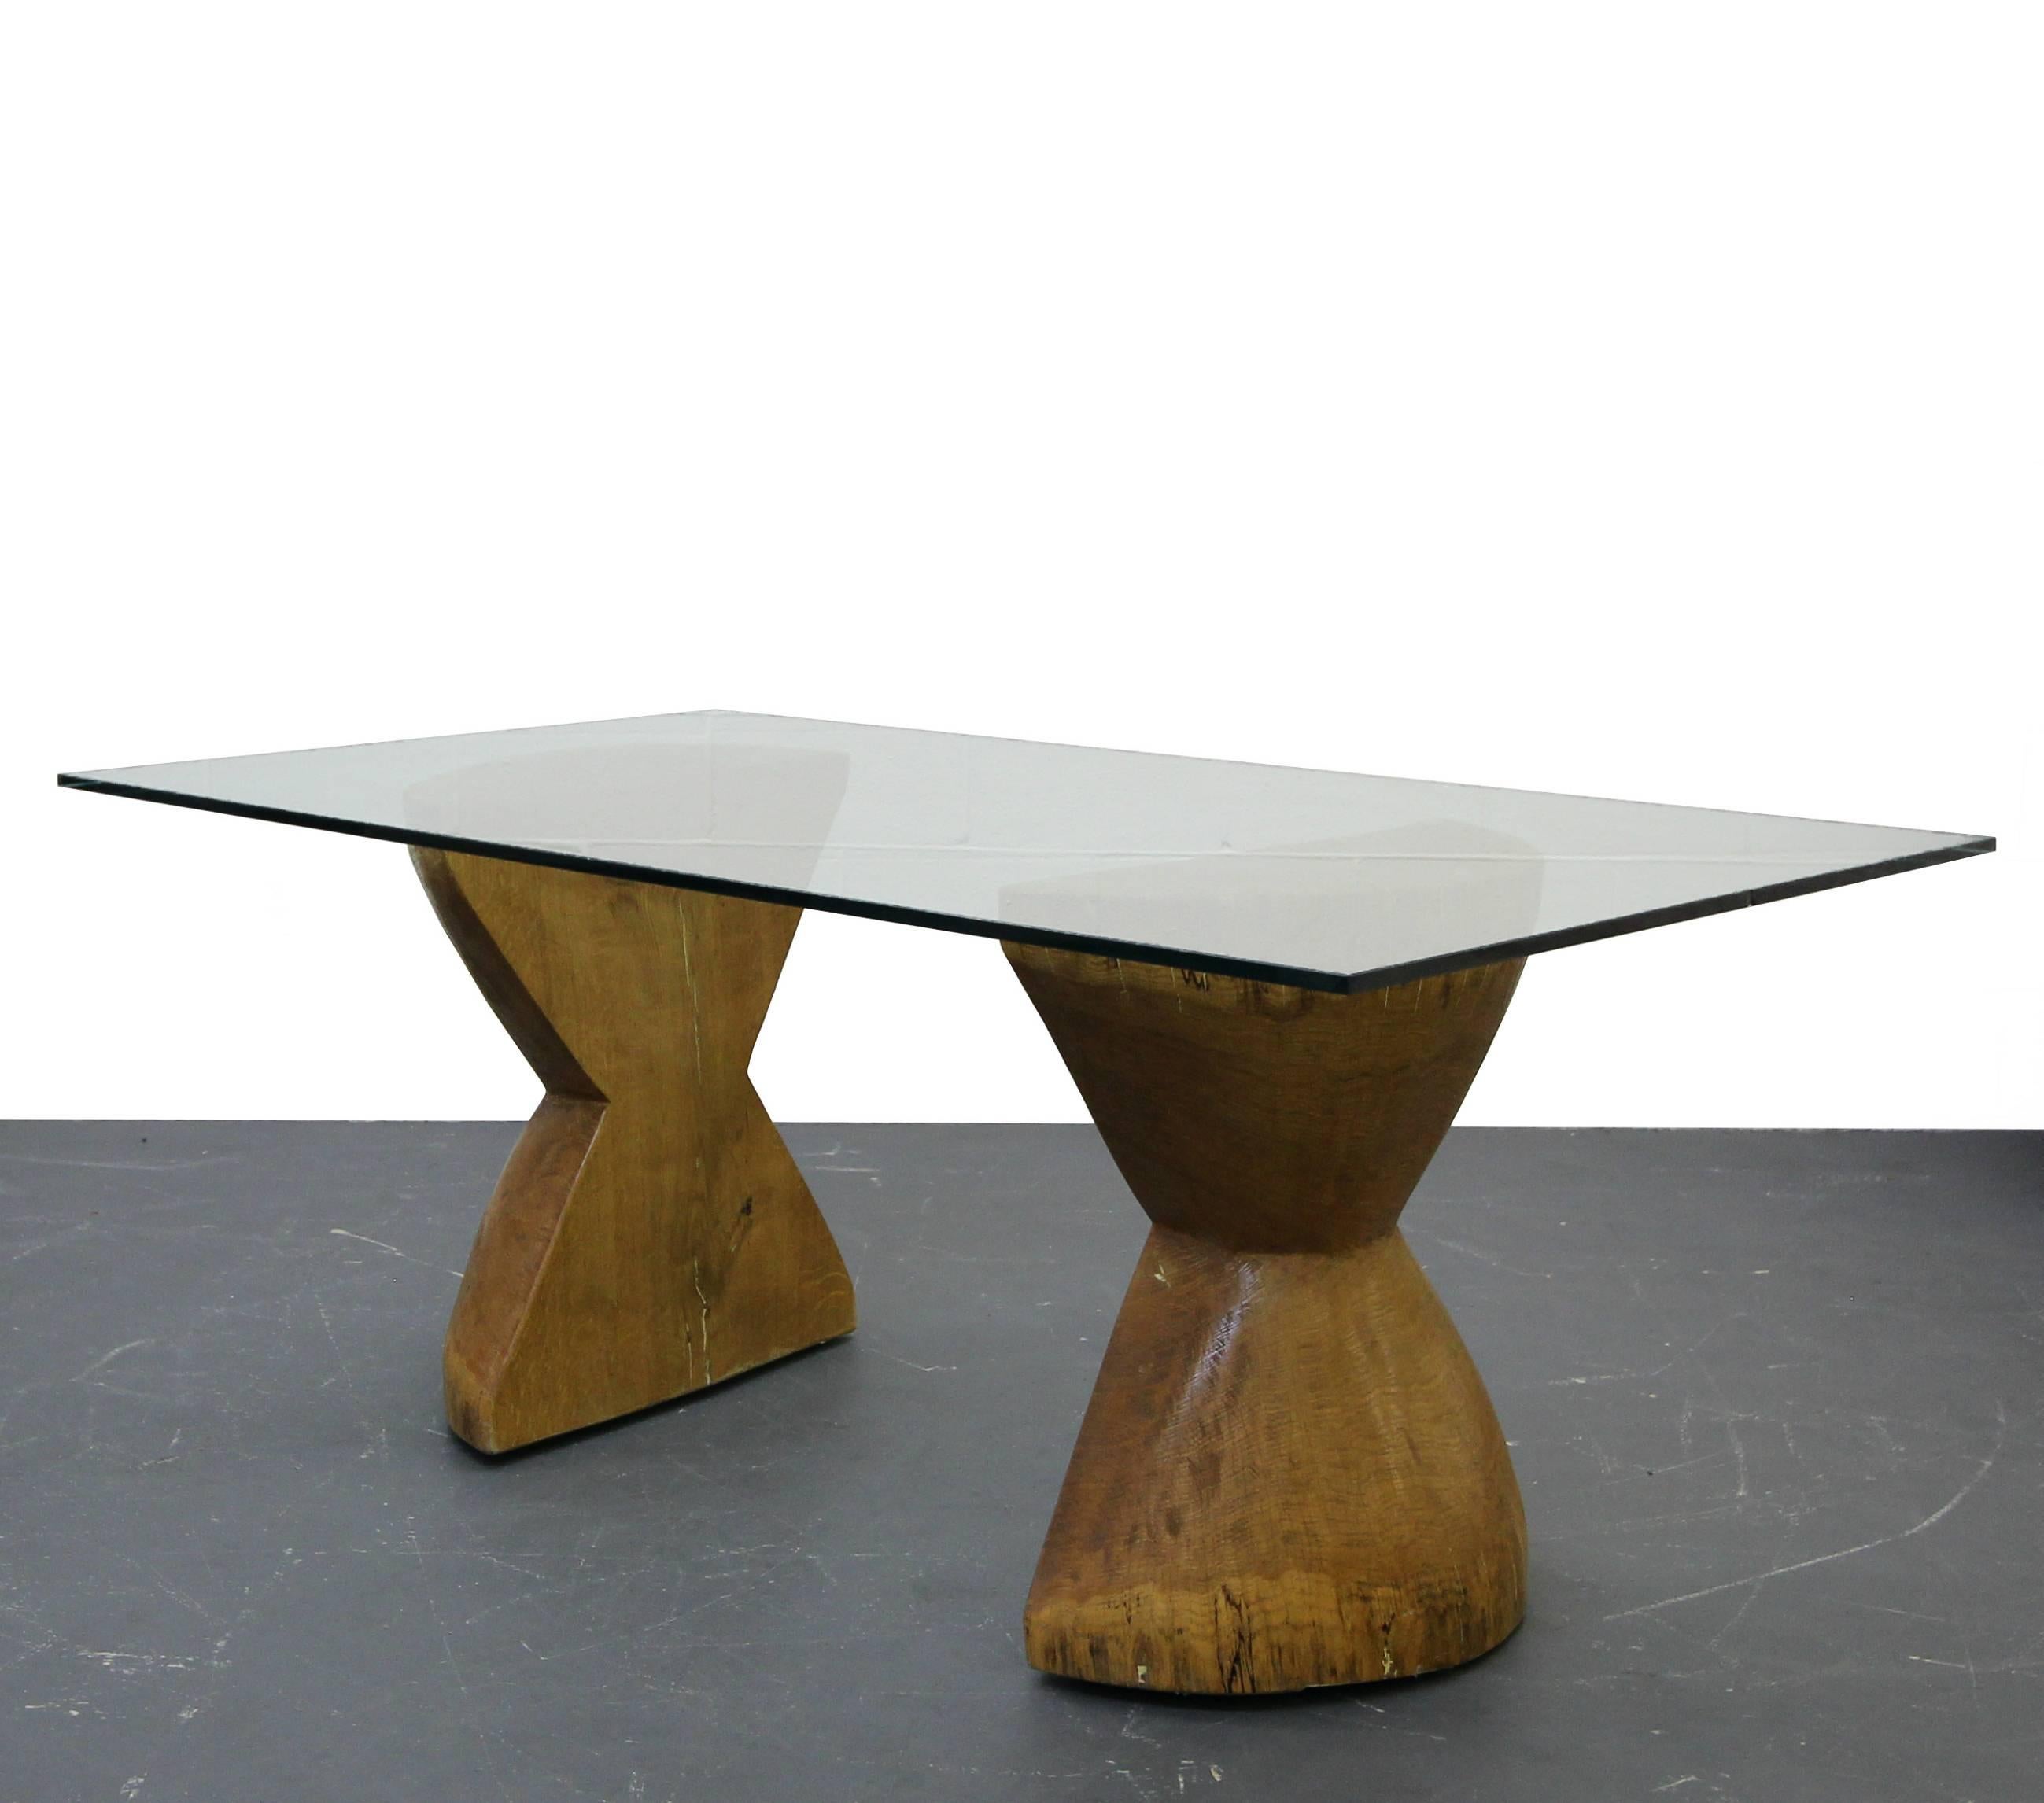 Pair of Raw Live Edge Wood Hourglass Dining Table Pedestals In Good Condition For Sale In Las Vegas, NV